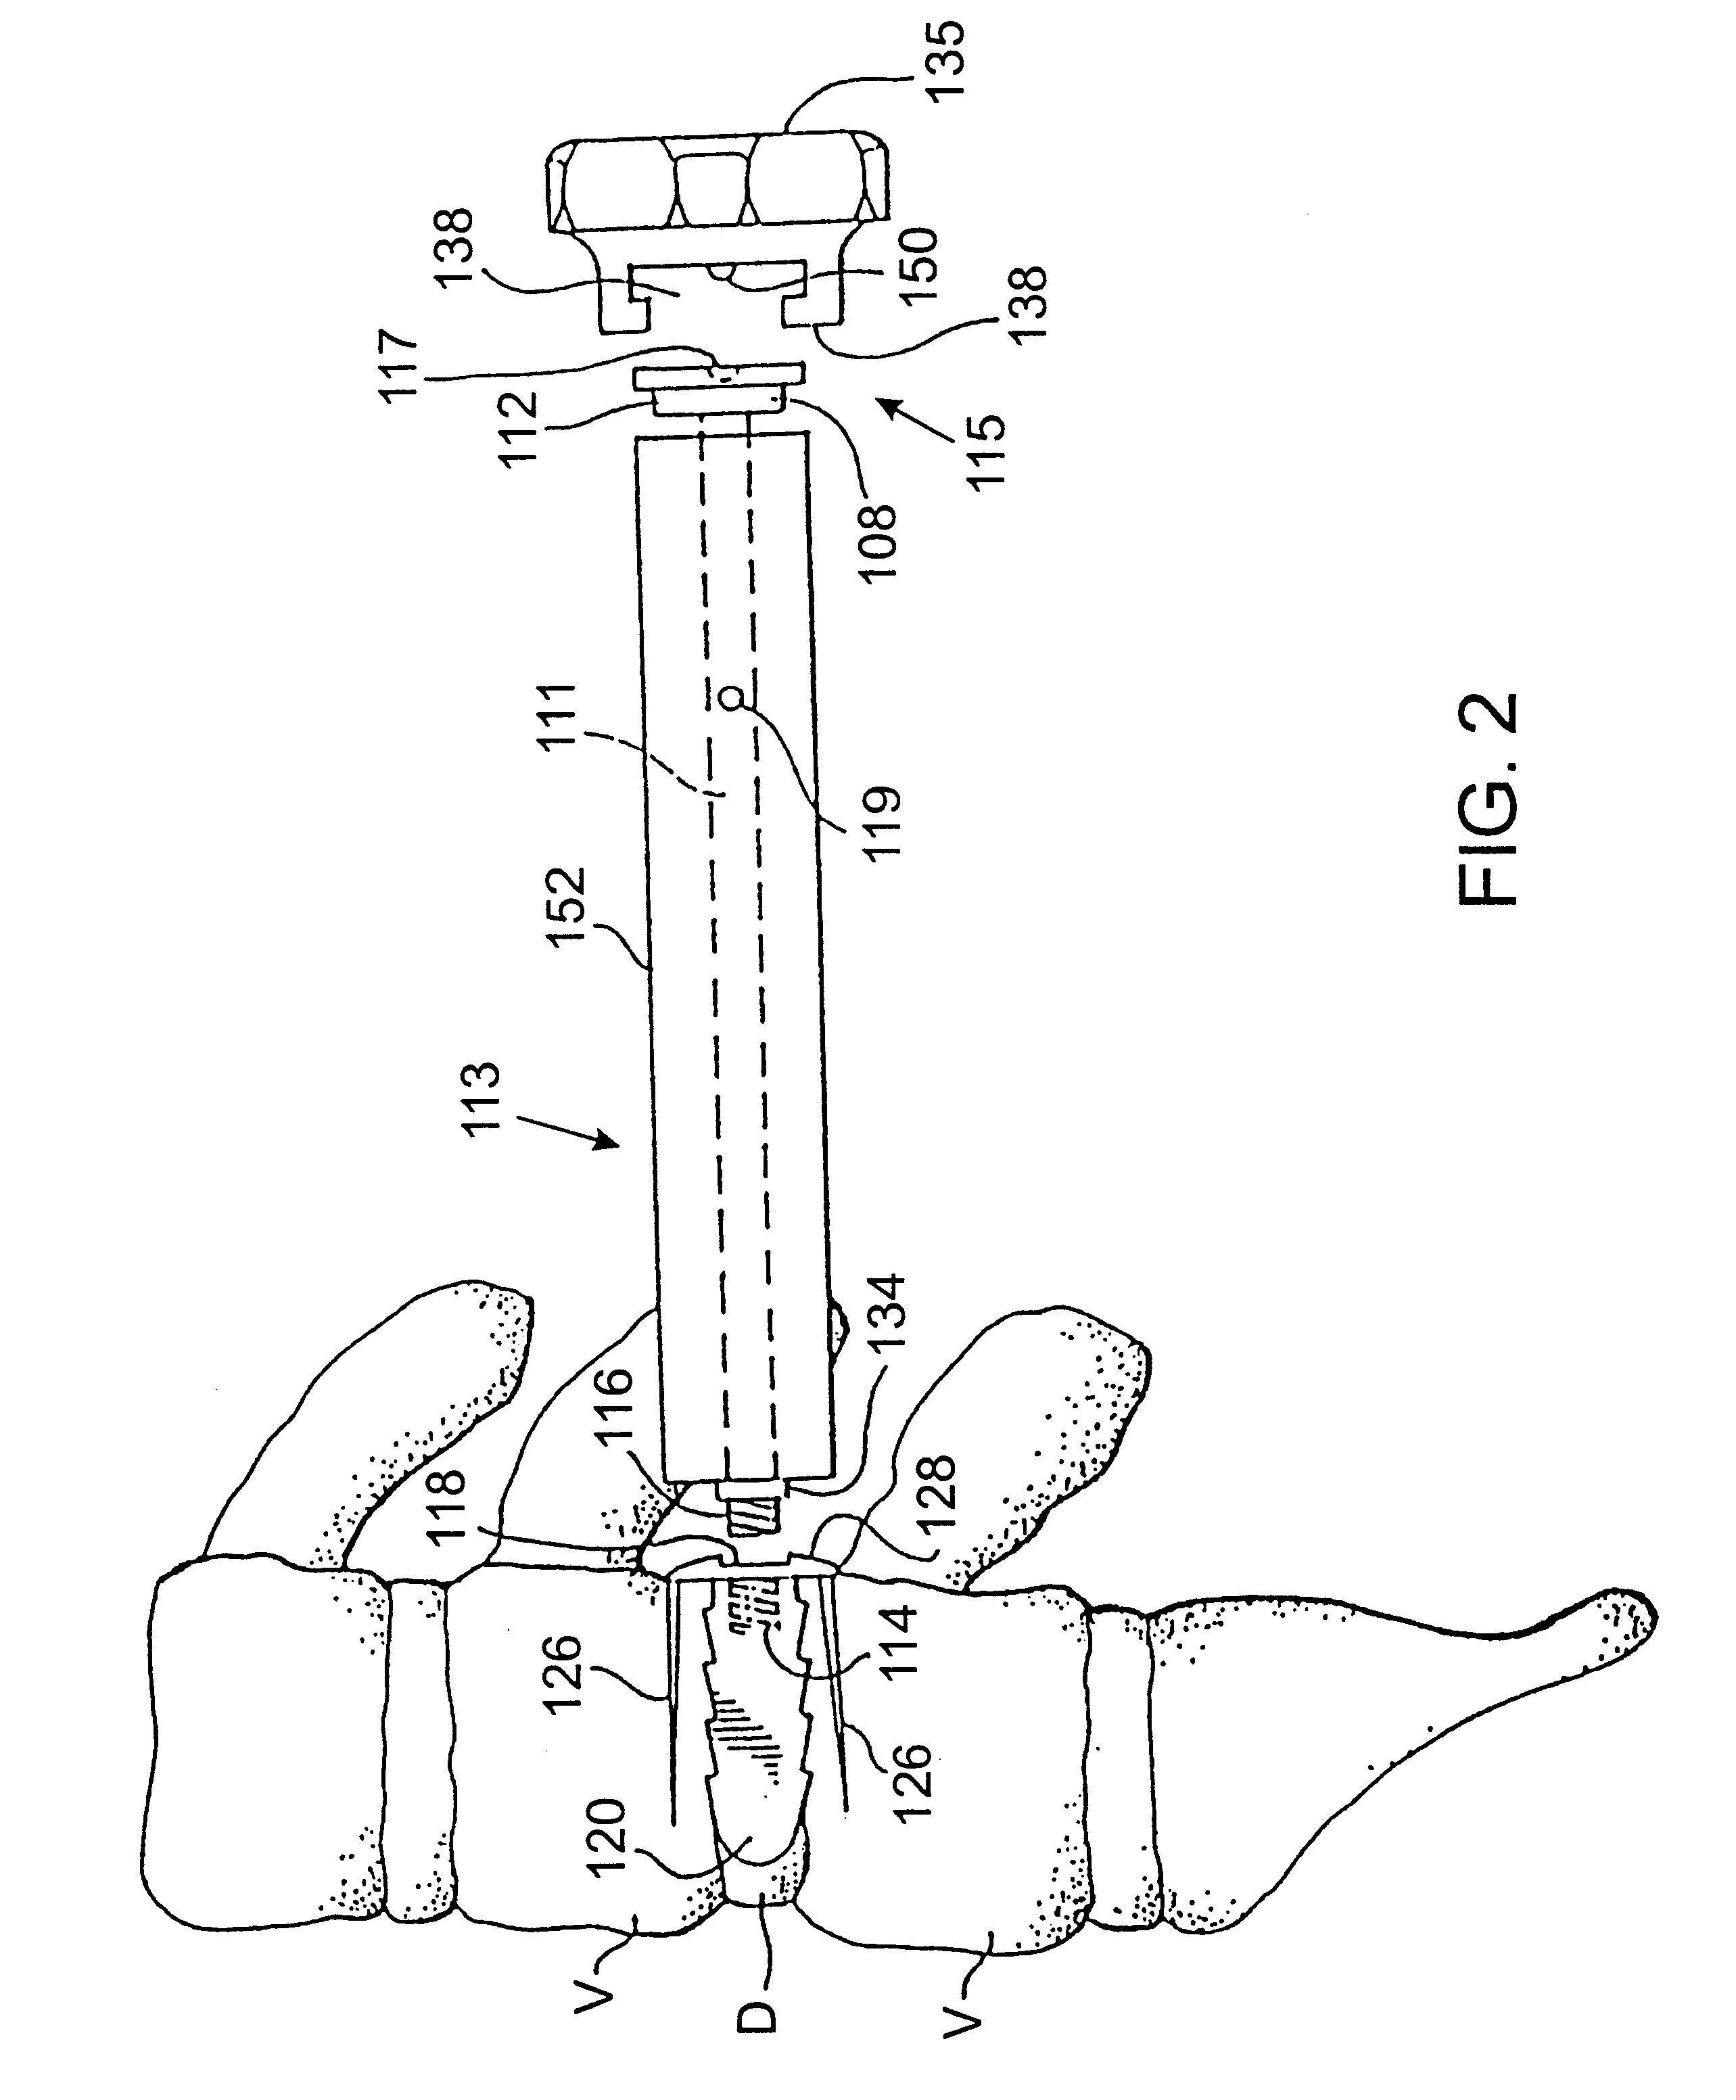 Apparatus for inserting spinal implants